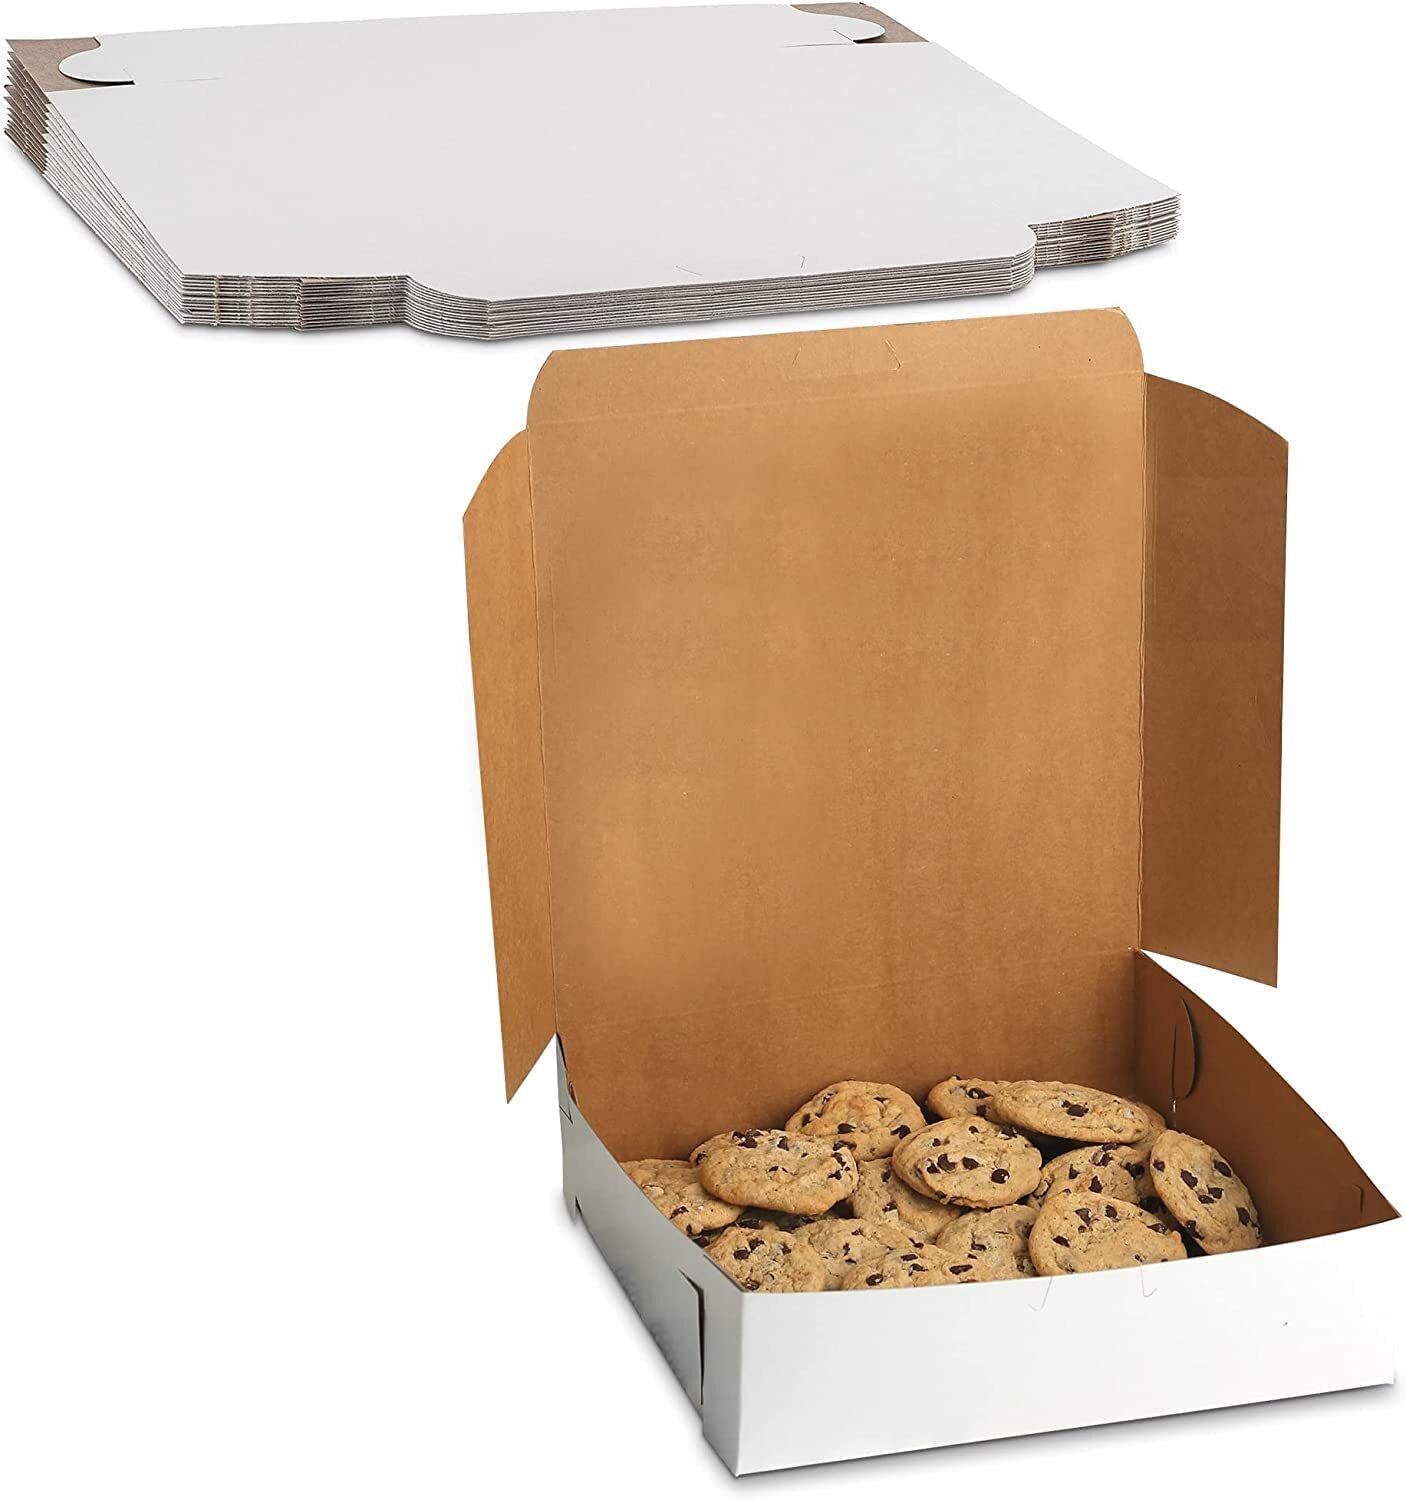 MT Products 9" x 9" x 3" White Pastry Boxes / Lock Corner Bakery Box -15 Pieces